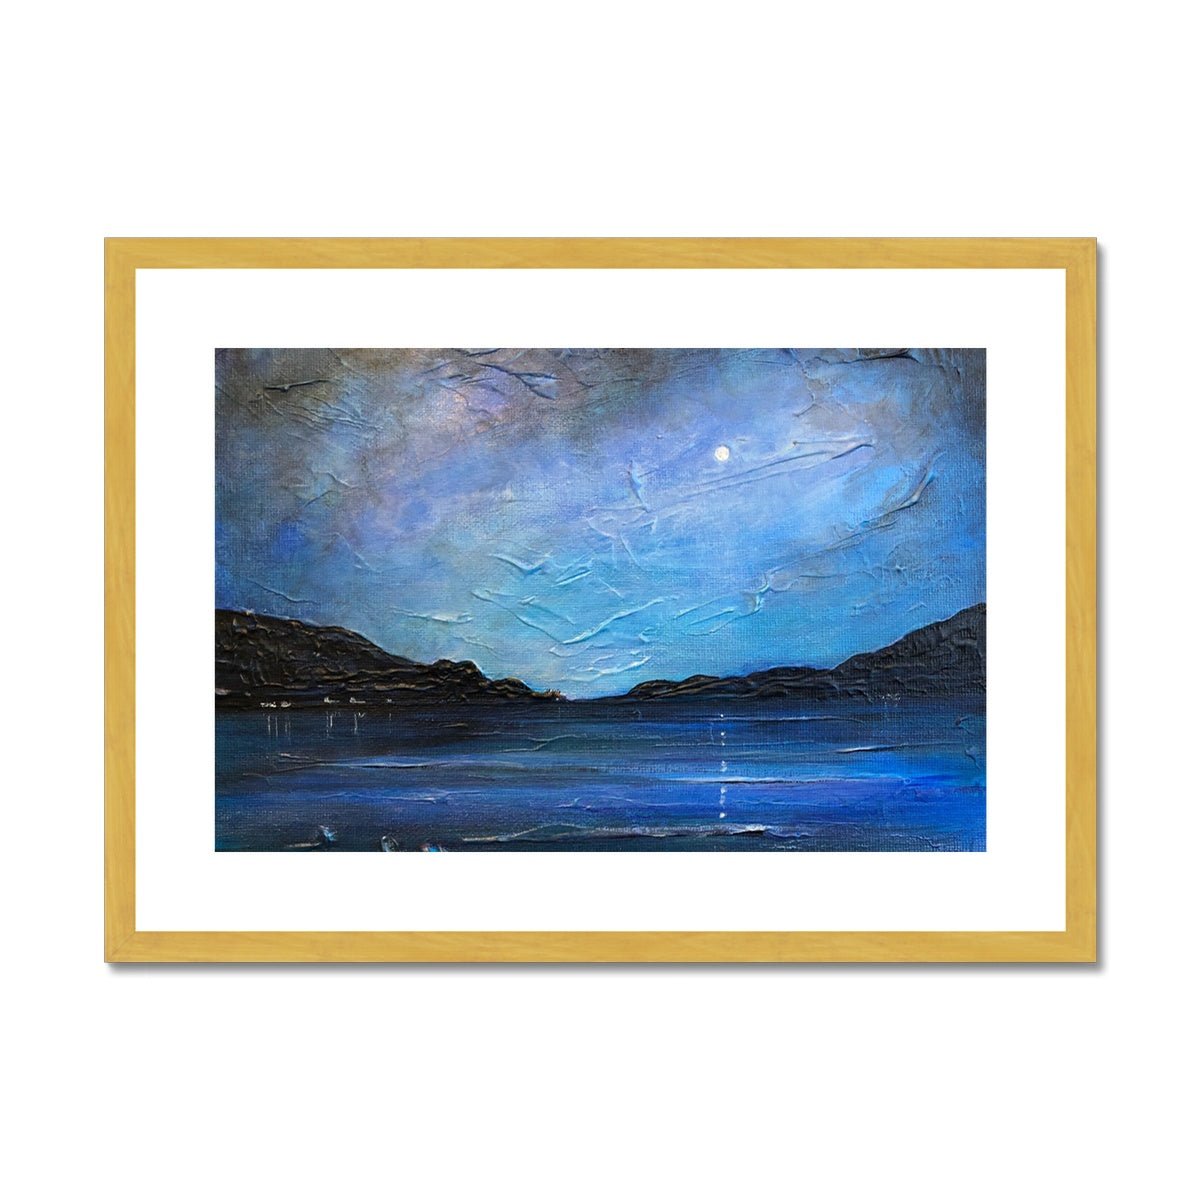 Loch Ness Moonlight Painting | Antique Framed & Mounted Prints From Scotland-Antique Framed & Mounted Prints-Scottish Lochs & Mountains Art Gallery-A2 Landscape-Gold Frame-Paintings, Prints, Homeware, Art Gifts From Scotland By Scottish Artist Kevin Hunter